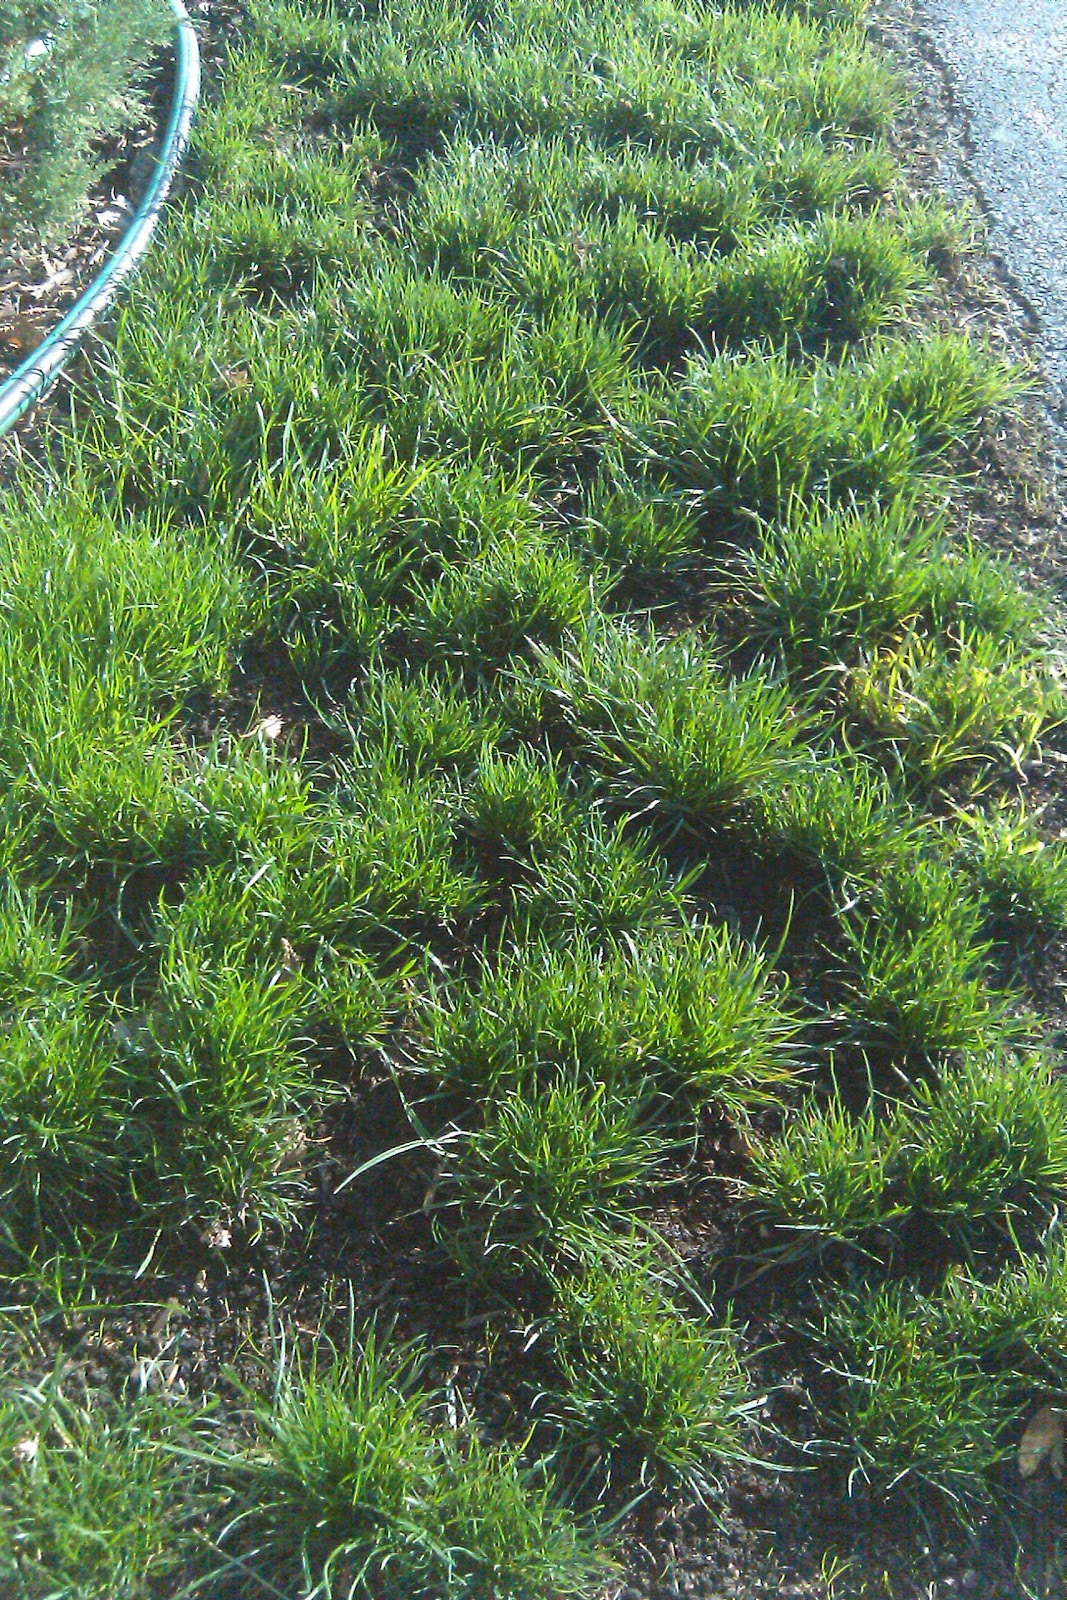 Lawn*Doctor Lawn Care Insights: Benefits of Rhizome grasses